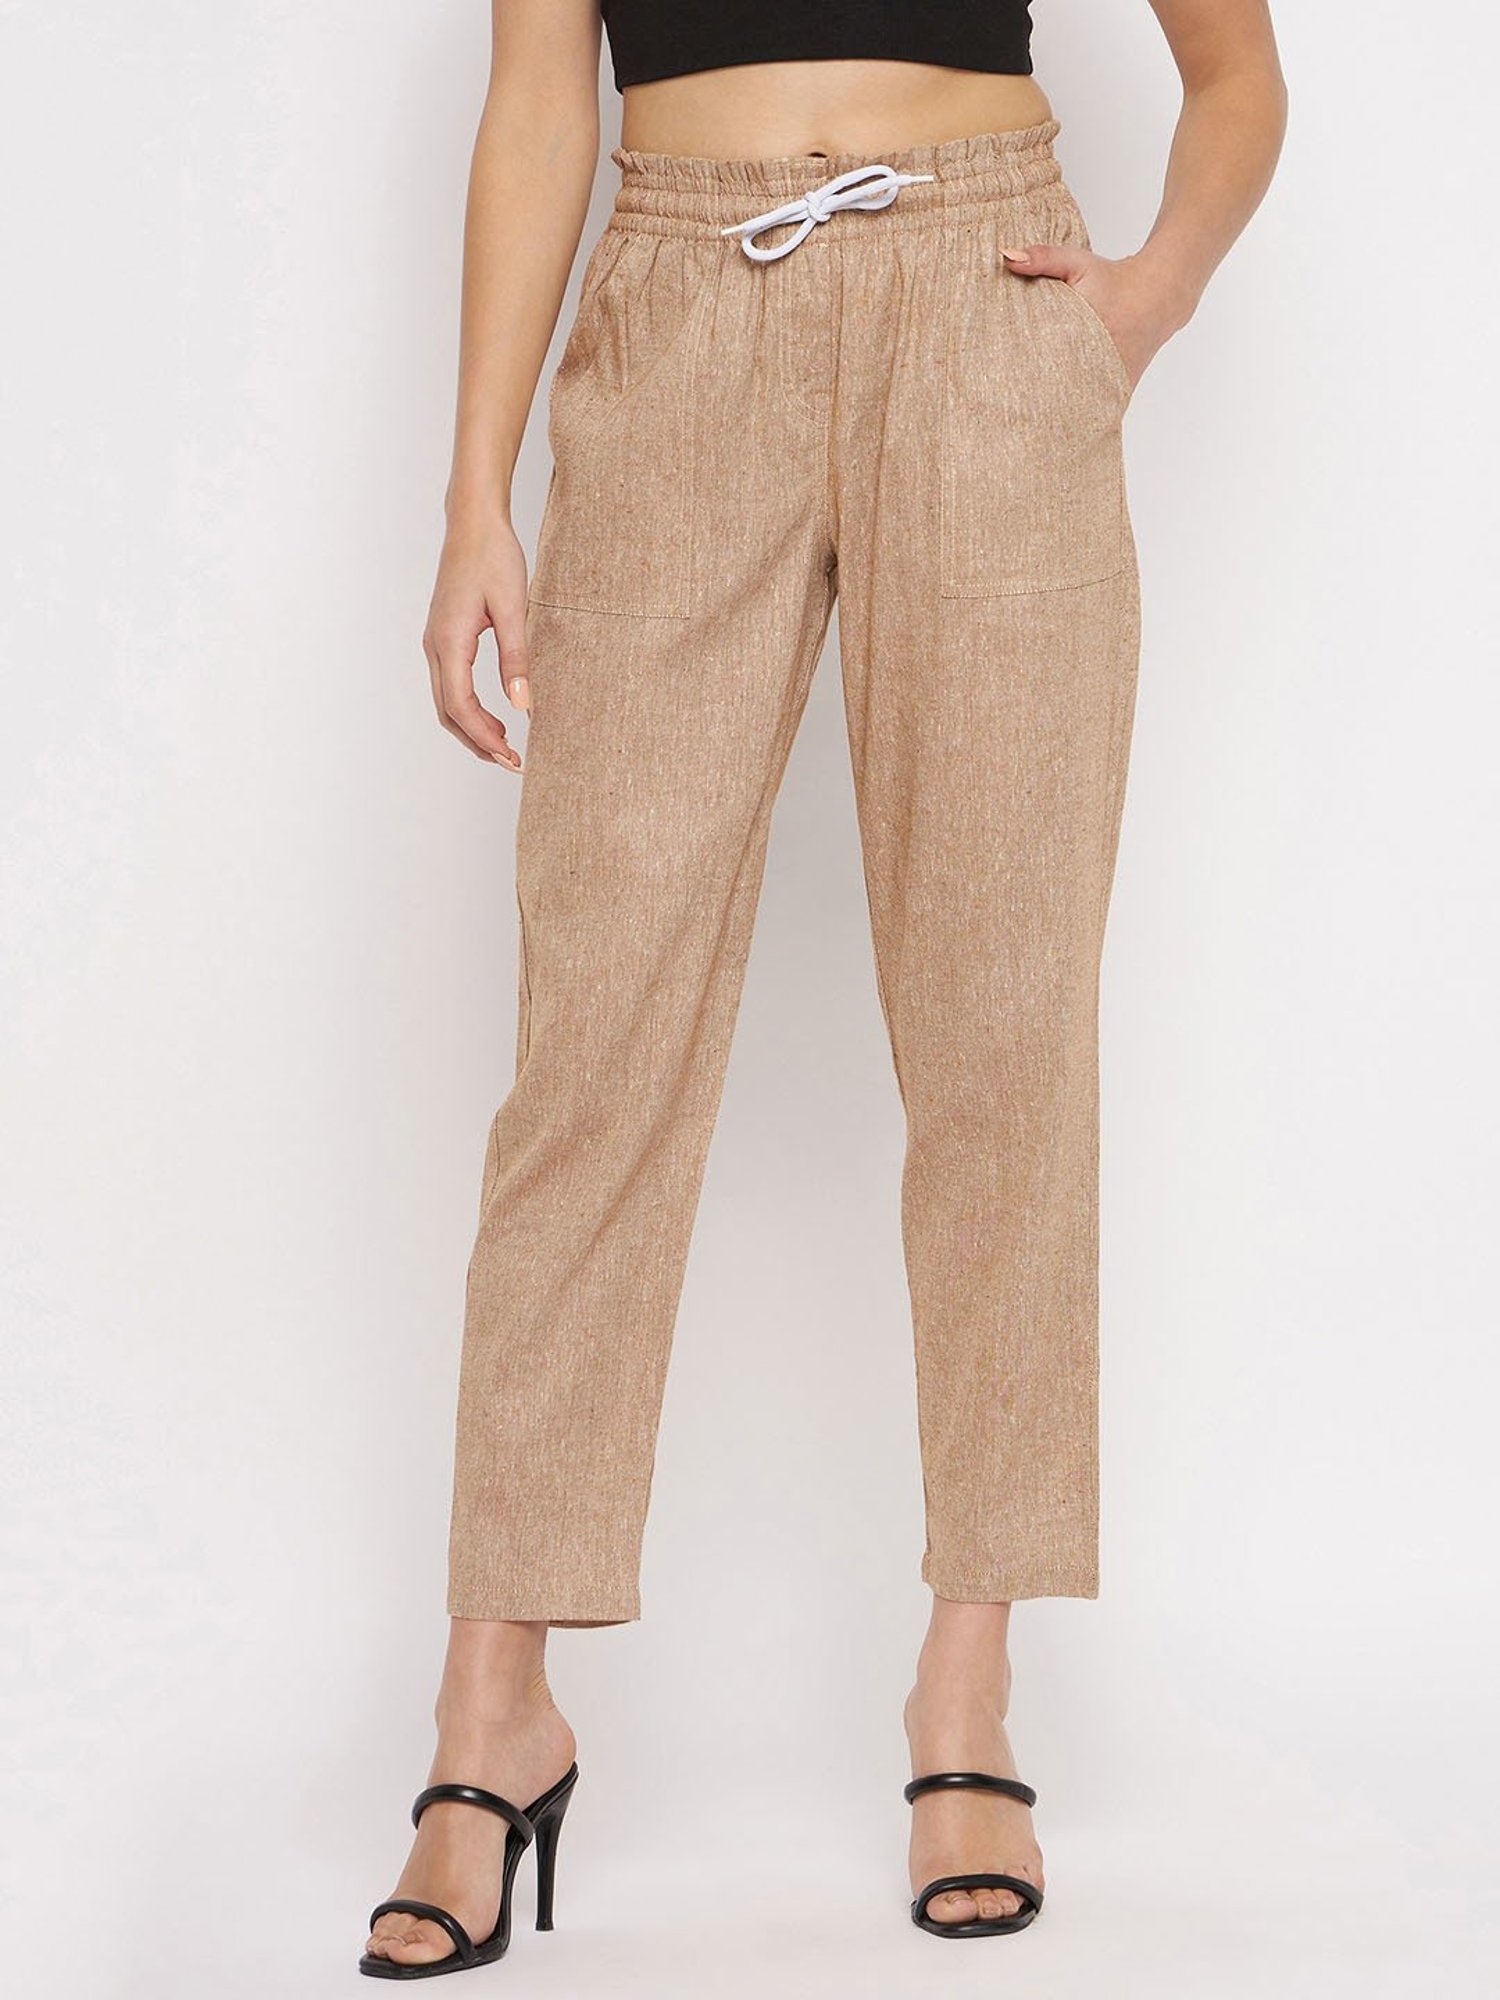 Womens Brown Trousers  MS